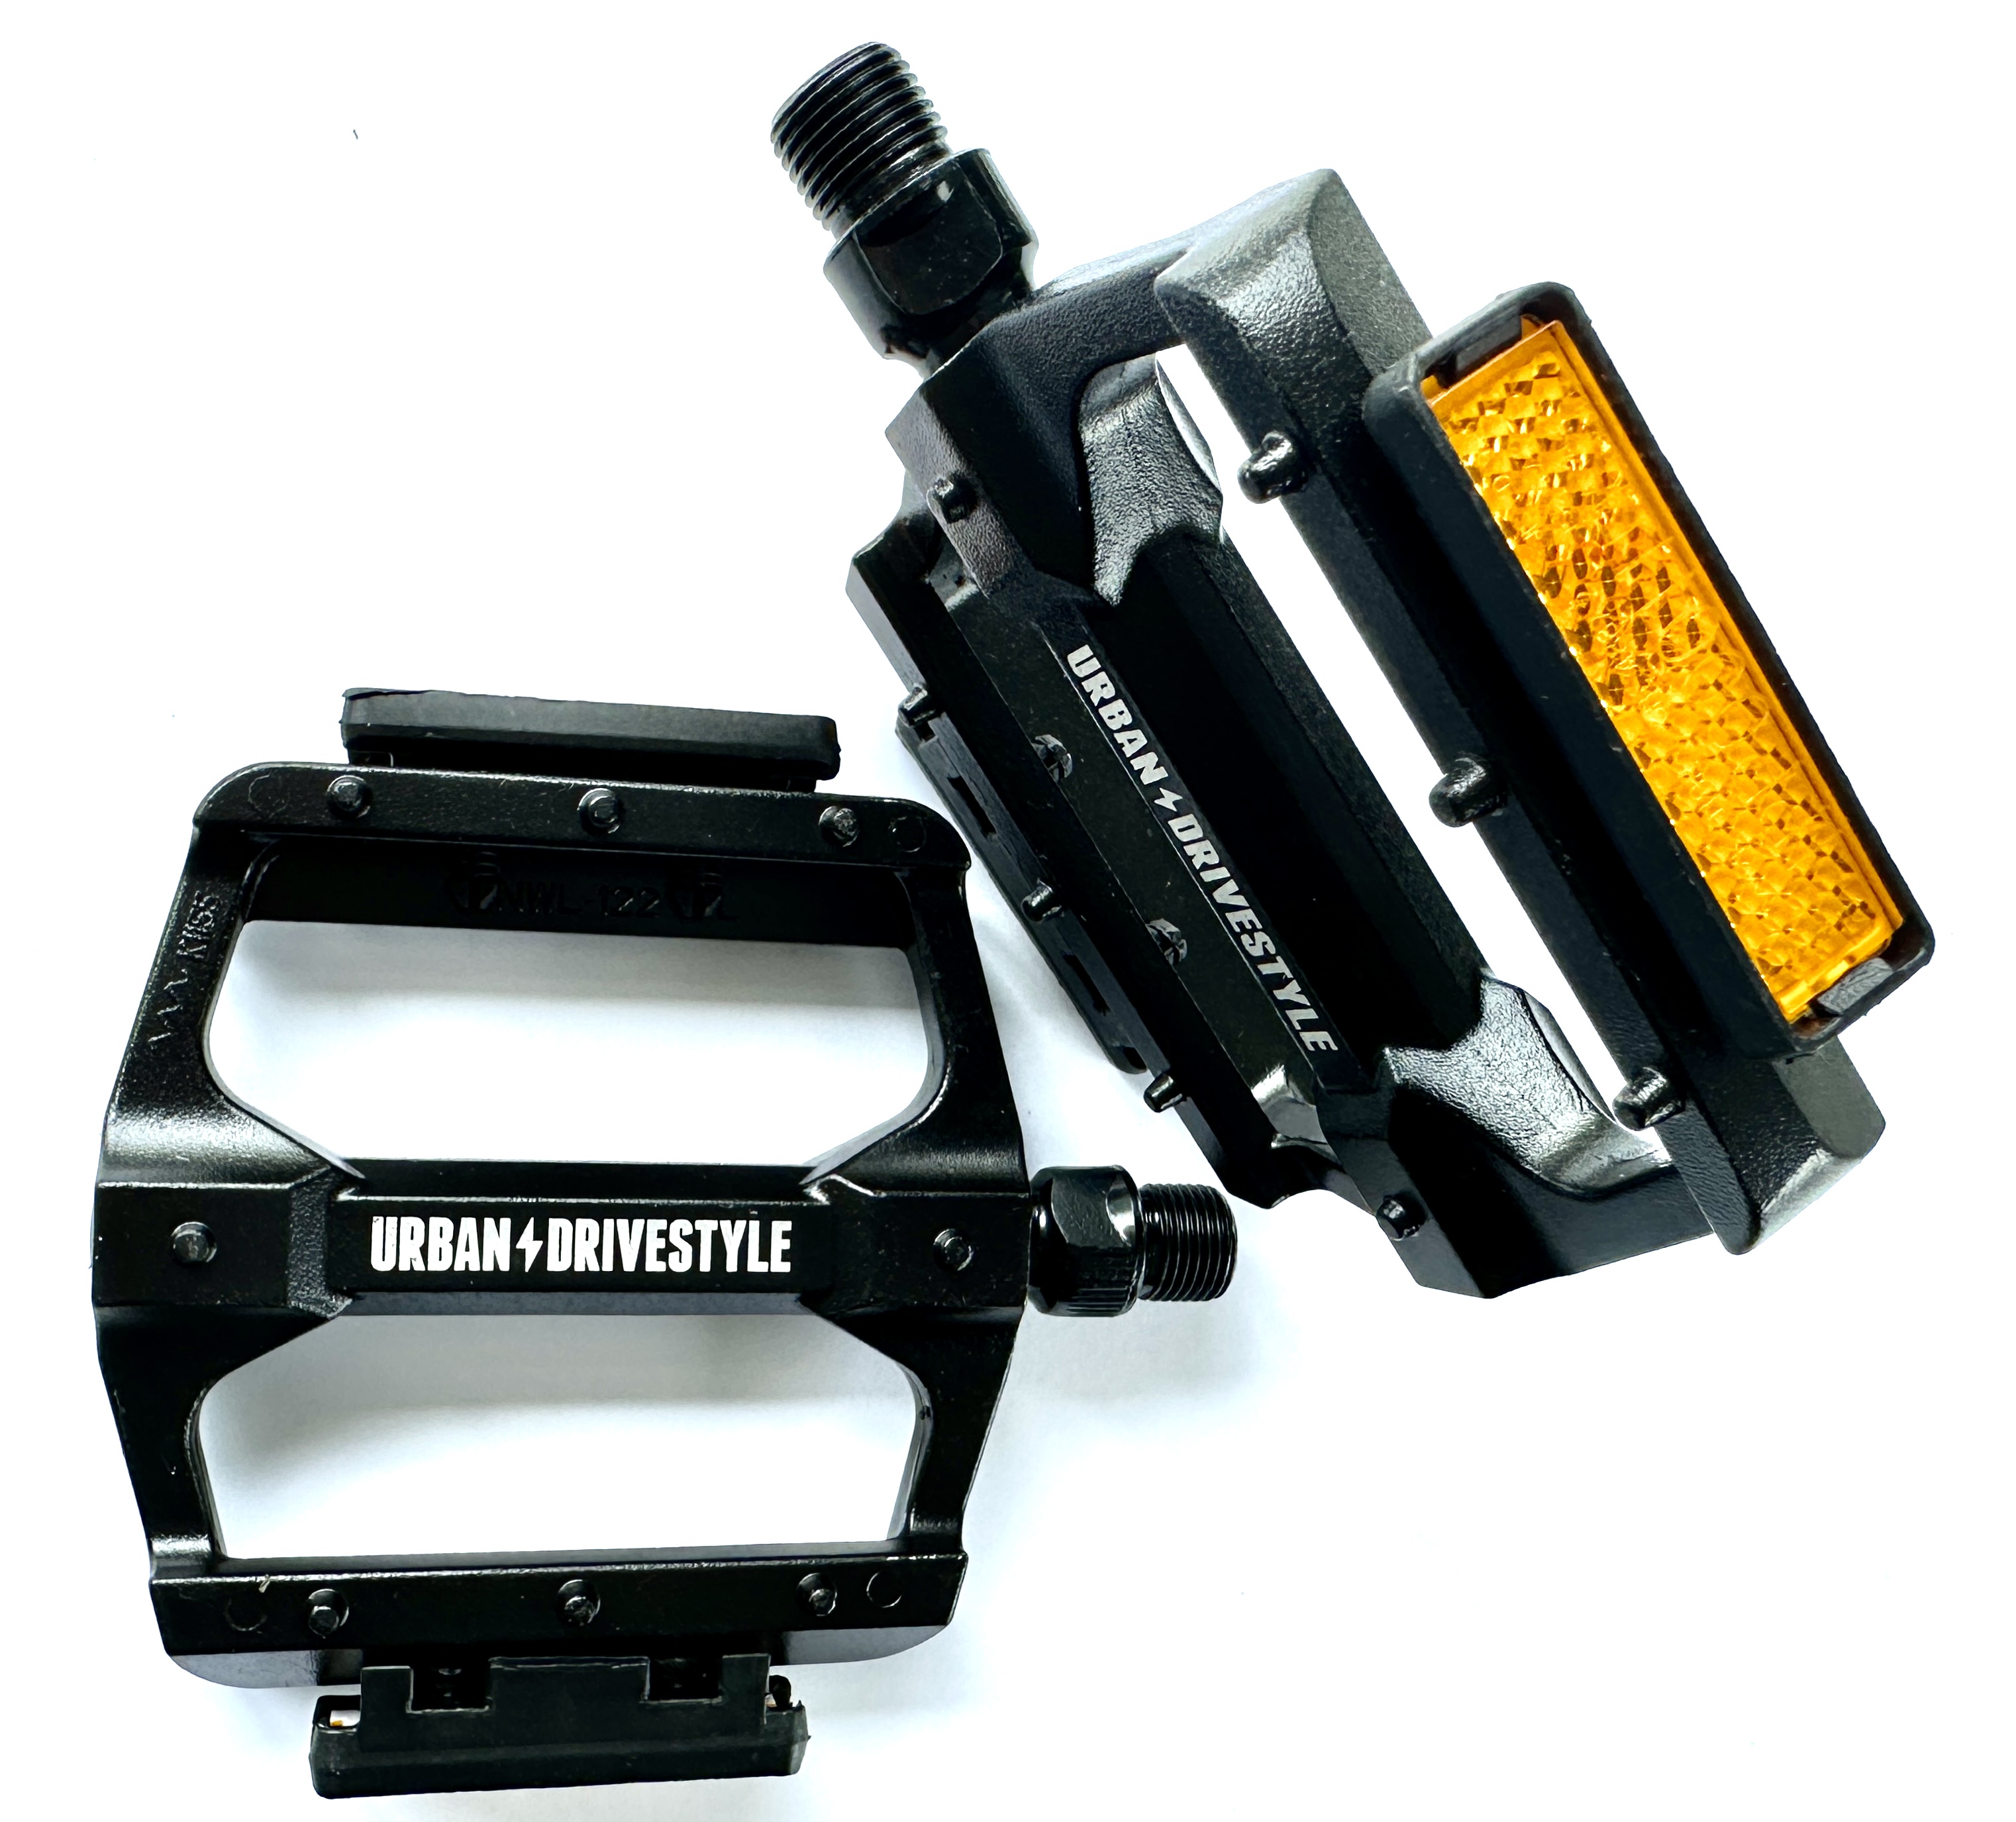 UD Pedals Alu Urban Drivestyle 9/16 with reflectors,black  